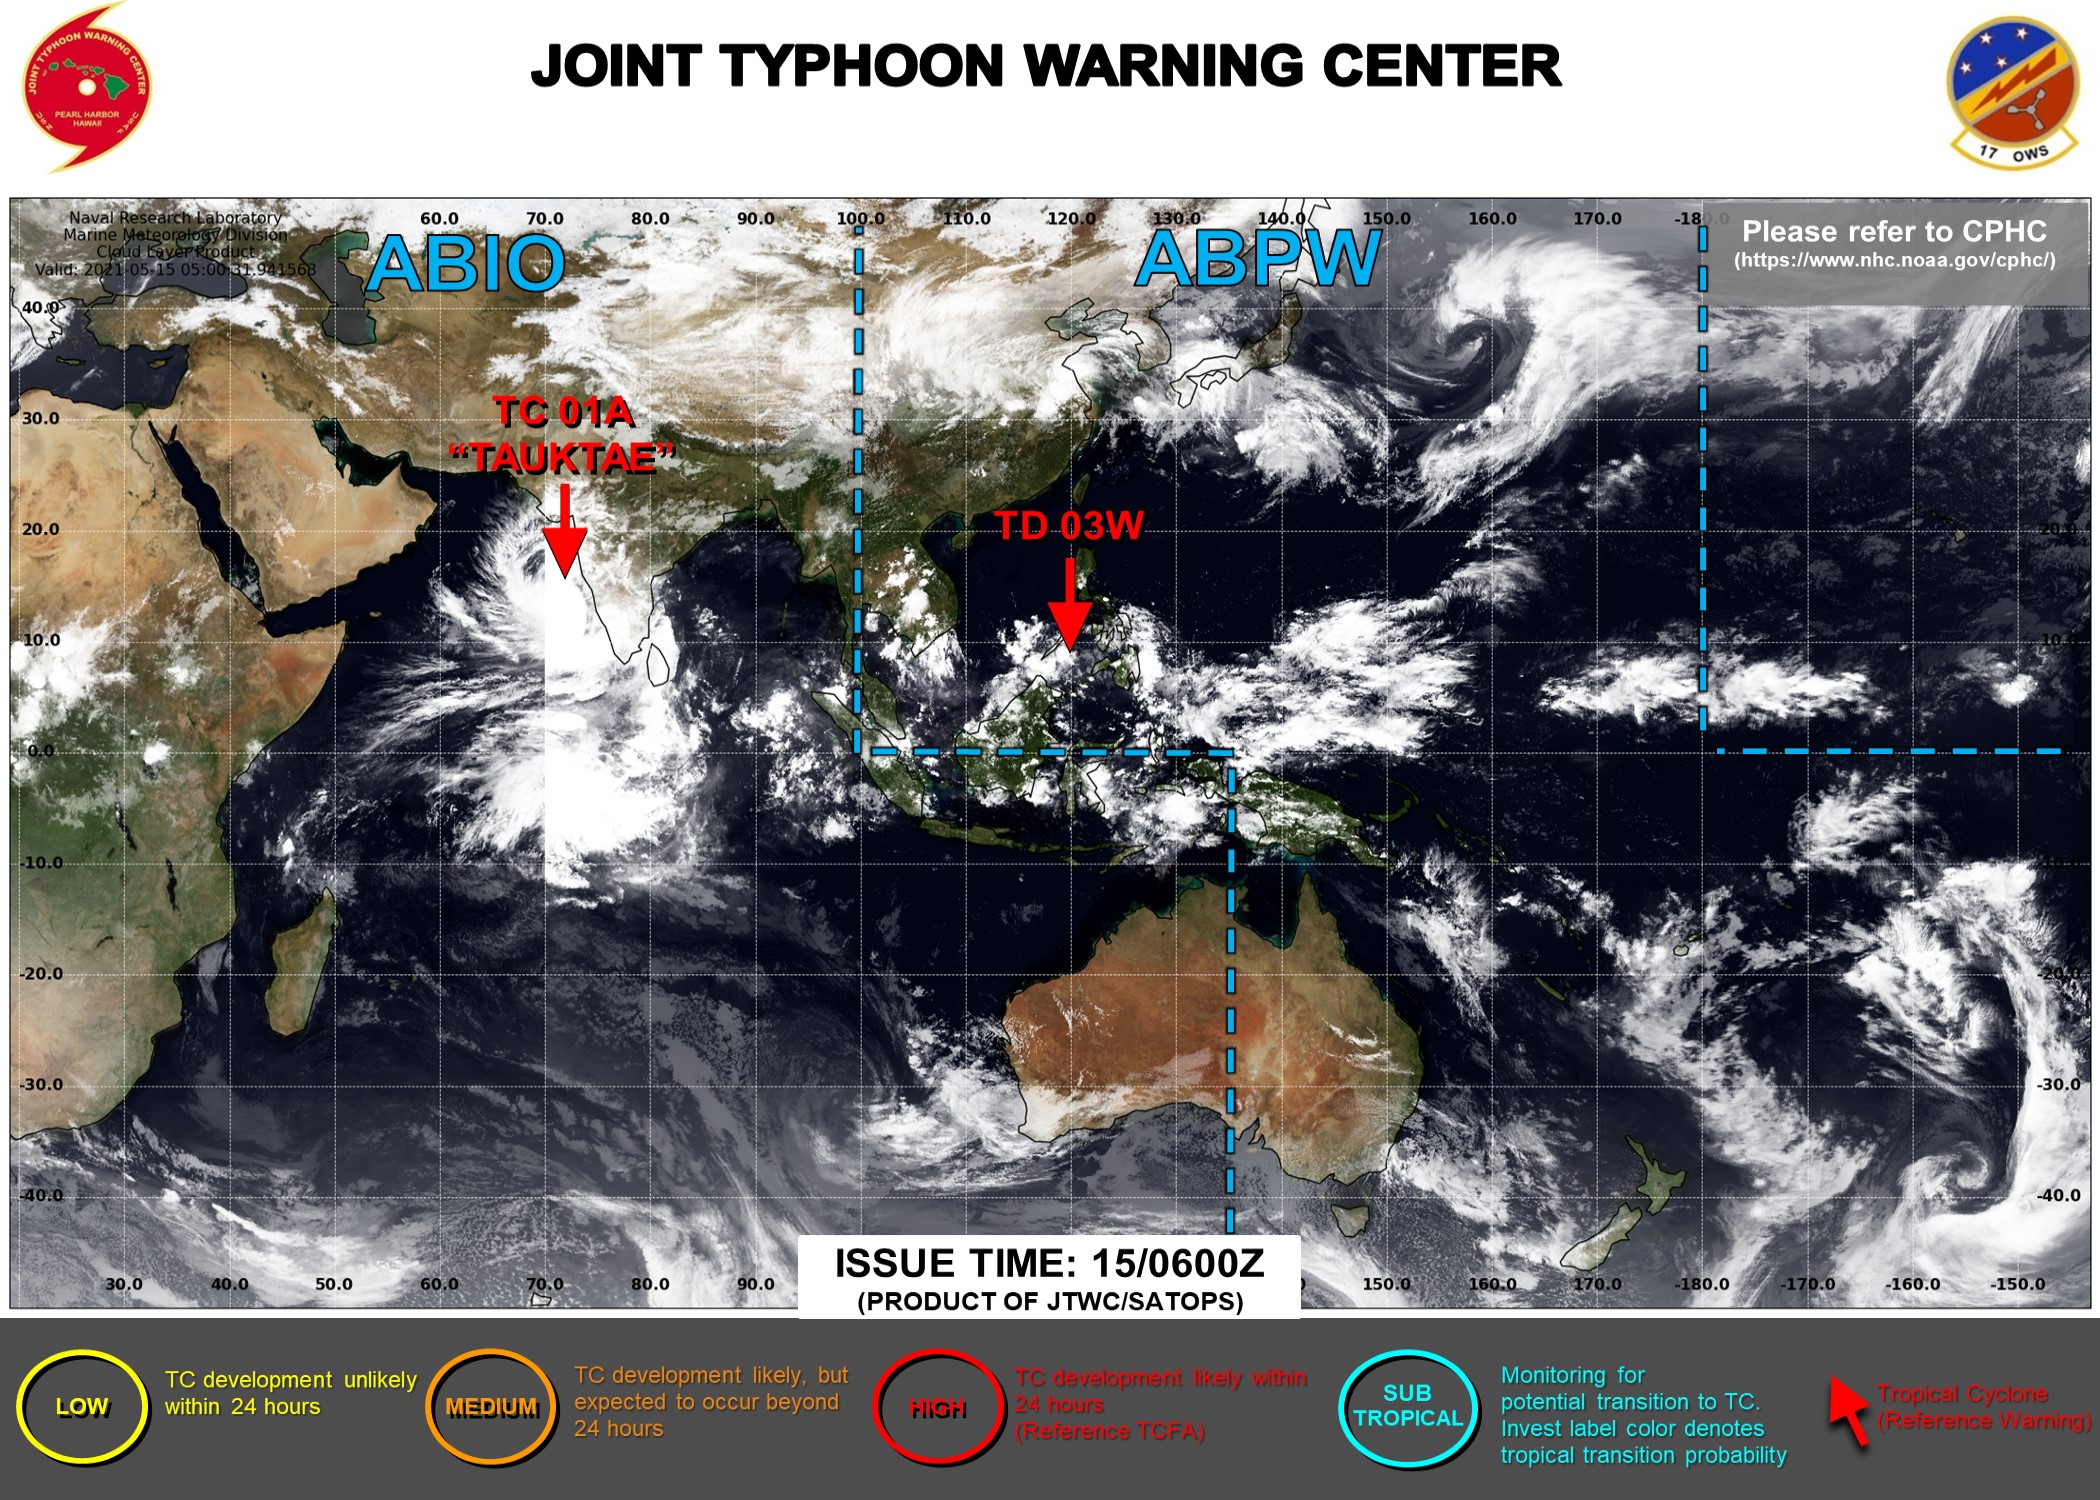 JTWC IS ISSUING 6HOURLY WARNINGS ON TC 01A(TAUKTAE). FINAL WARNING ON TD 03W WAS ISSUED AT 14/21UTC. 3HOURLY SATELLITE BULLETINS ARE ISSUED FOR BOTH SYSTEMS.